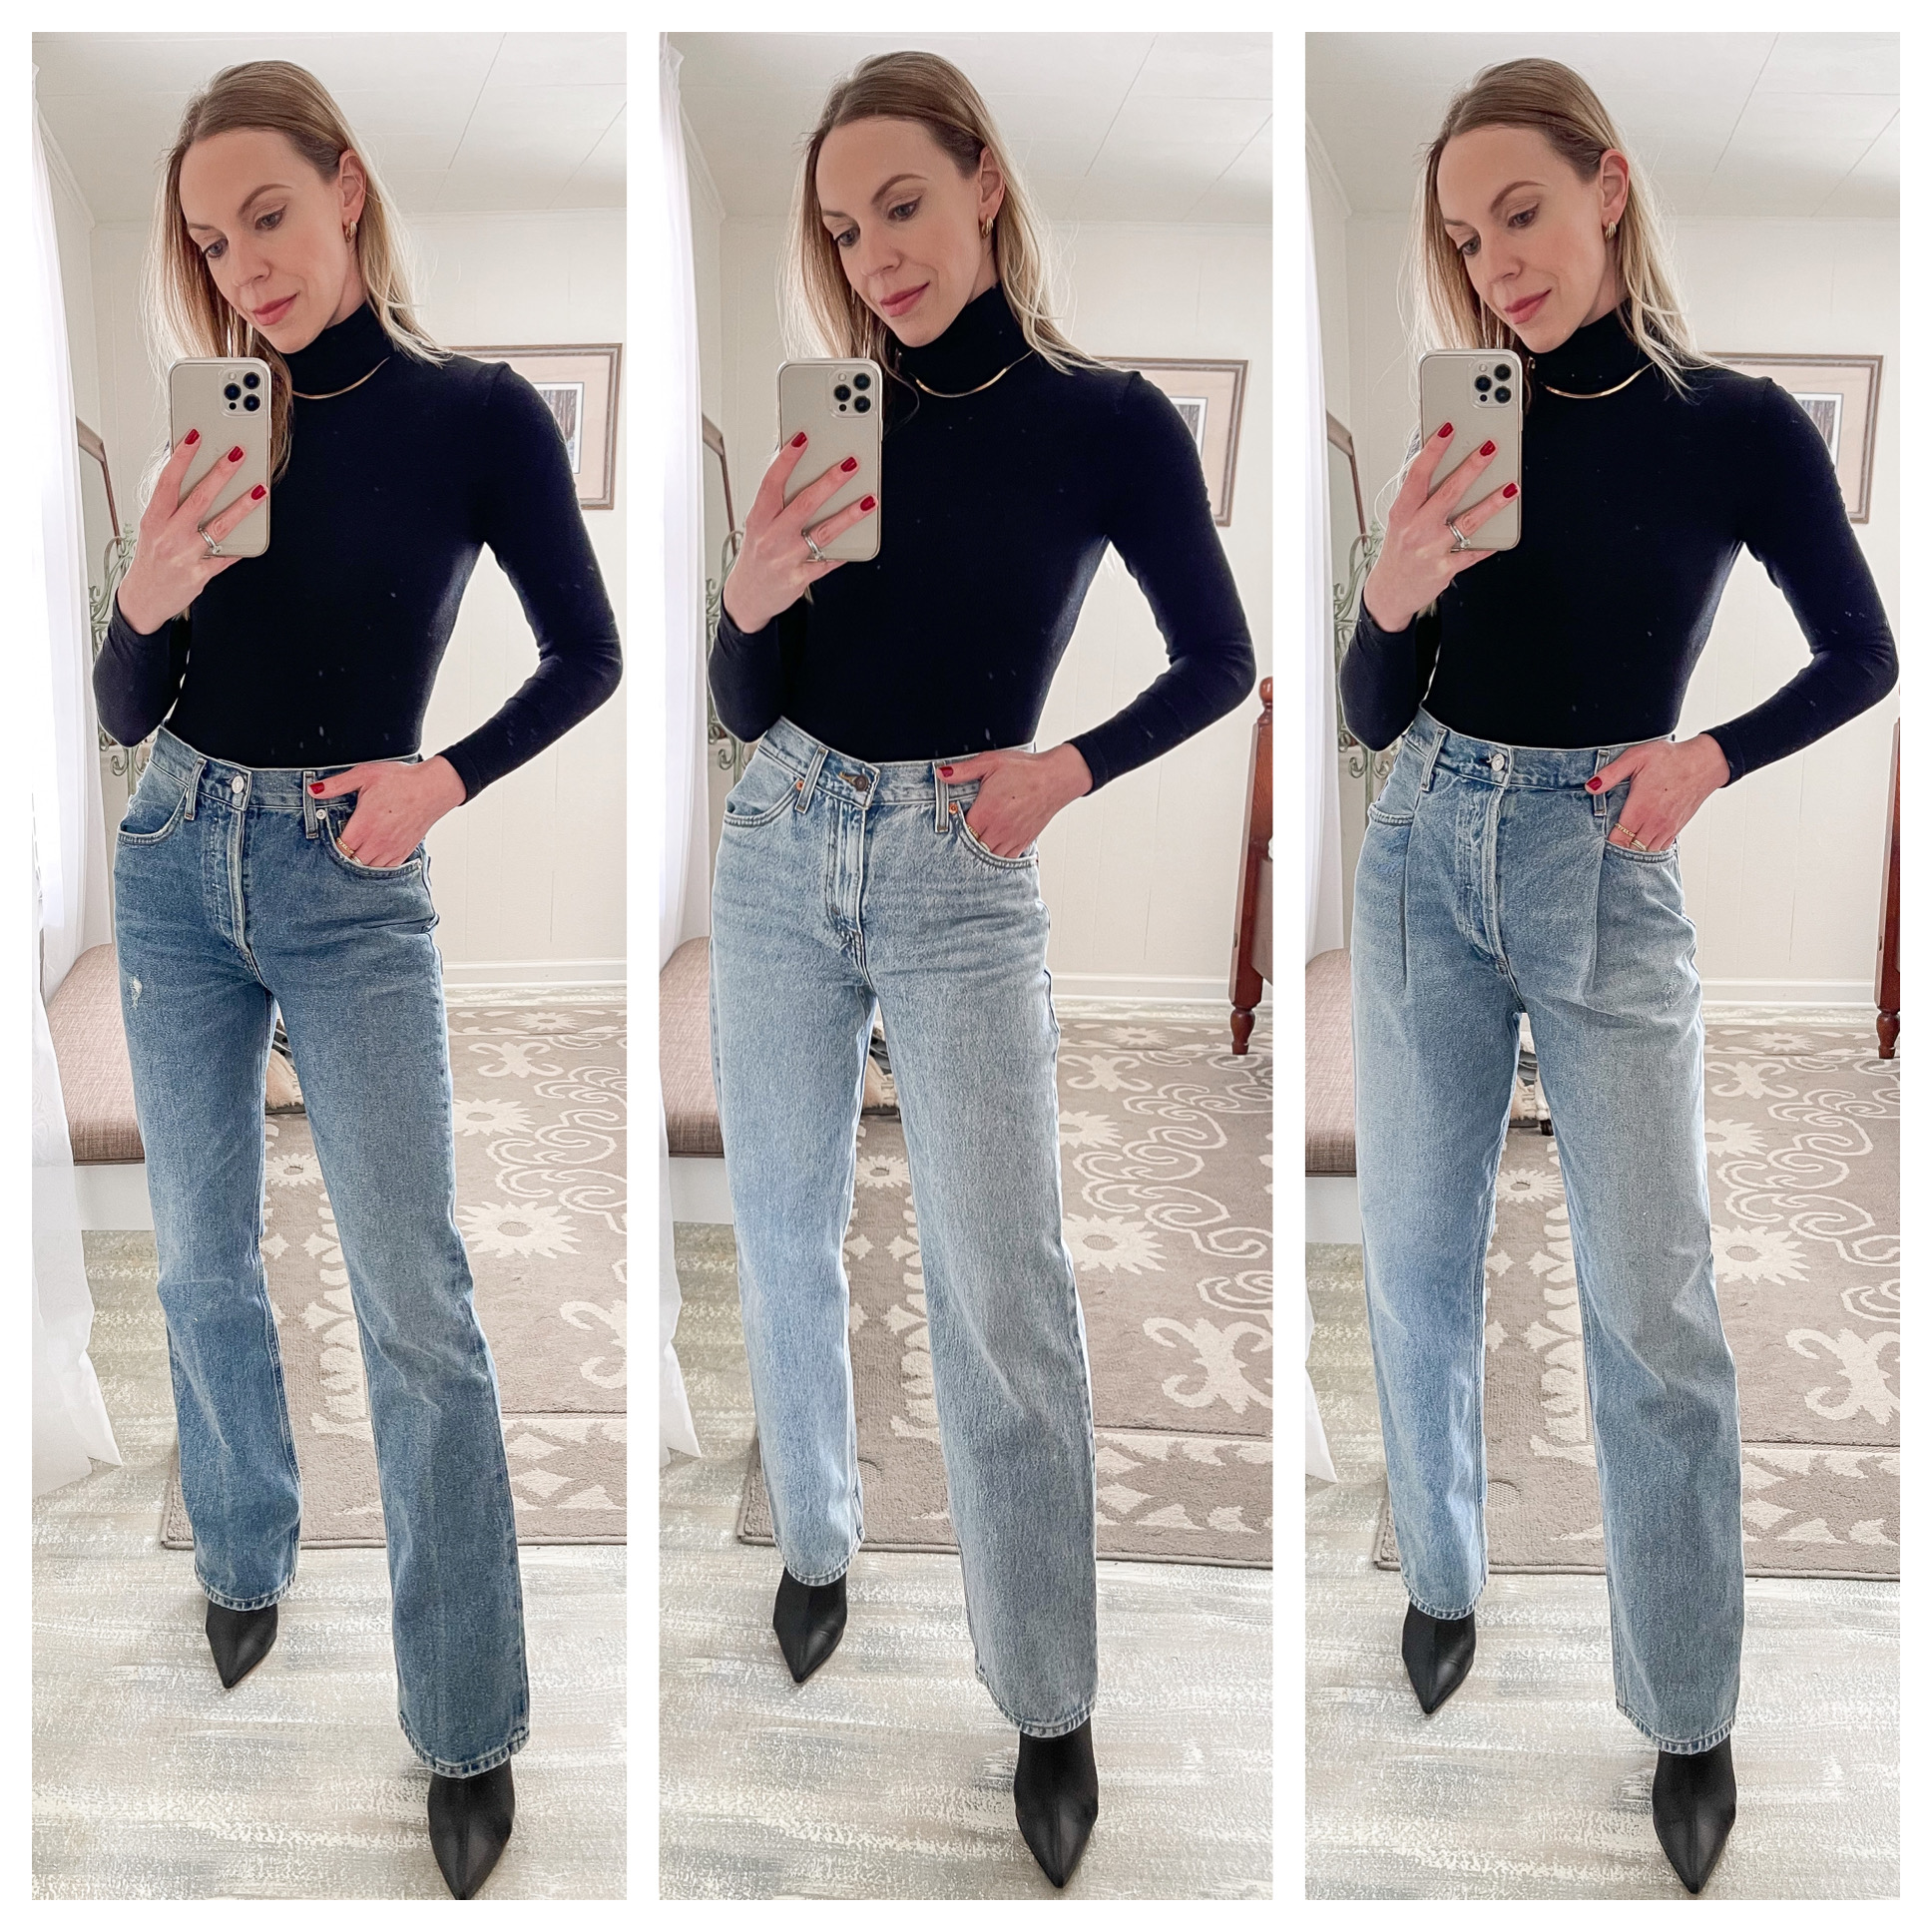 https://www.meagansmoda.com/wp-content/uploads/2022/02/Meagan-Brandon-of-Meagans-Moda-shares-denim-trends-for-2022-wide-leg-jeans-bootcut-jeans-tapered-loose-fit-jeans.jpg